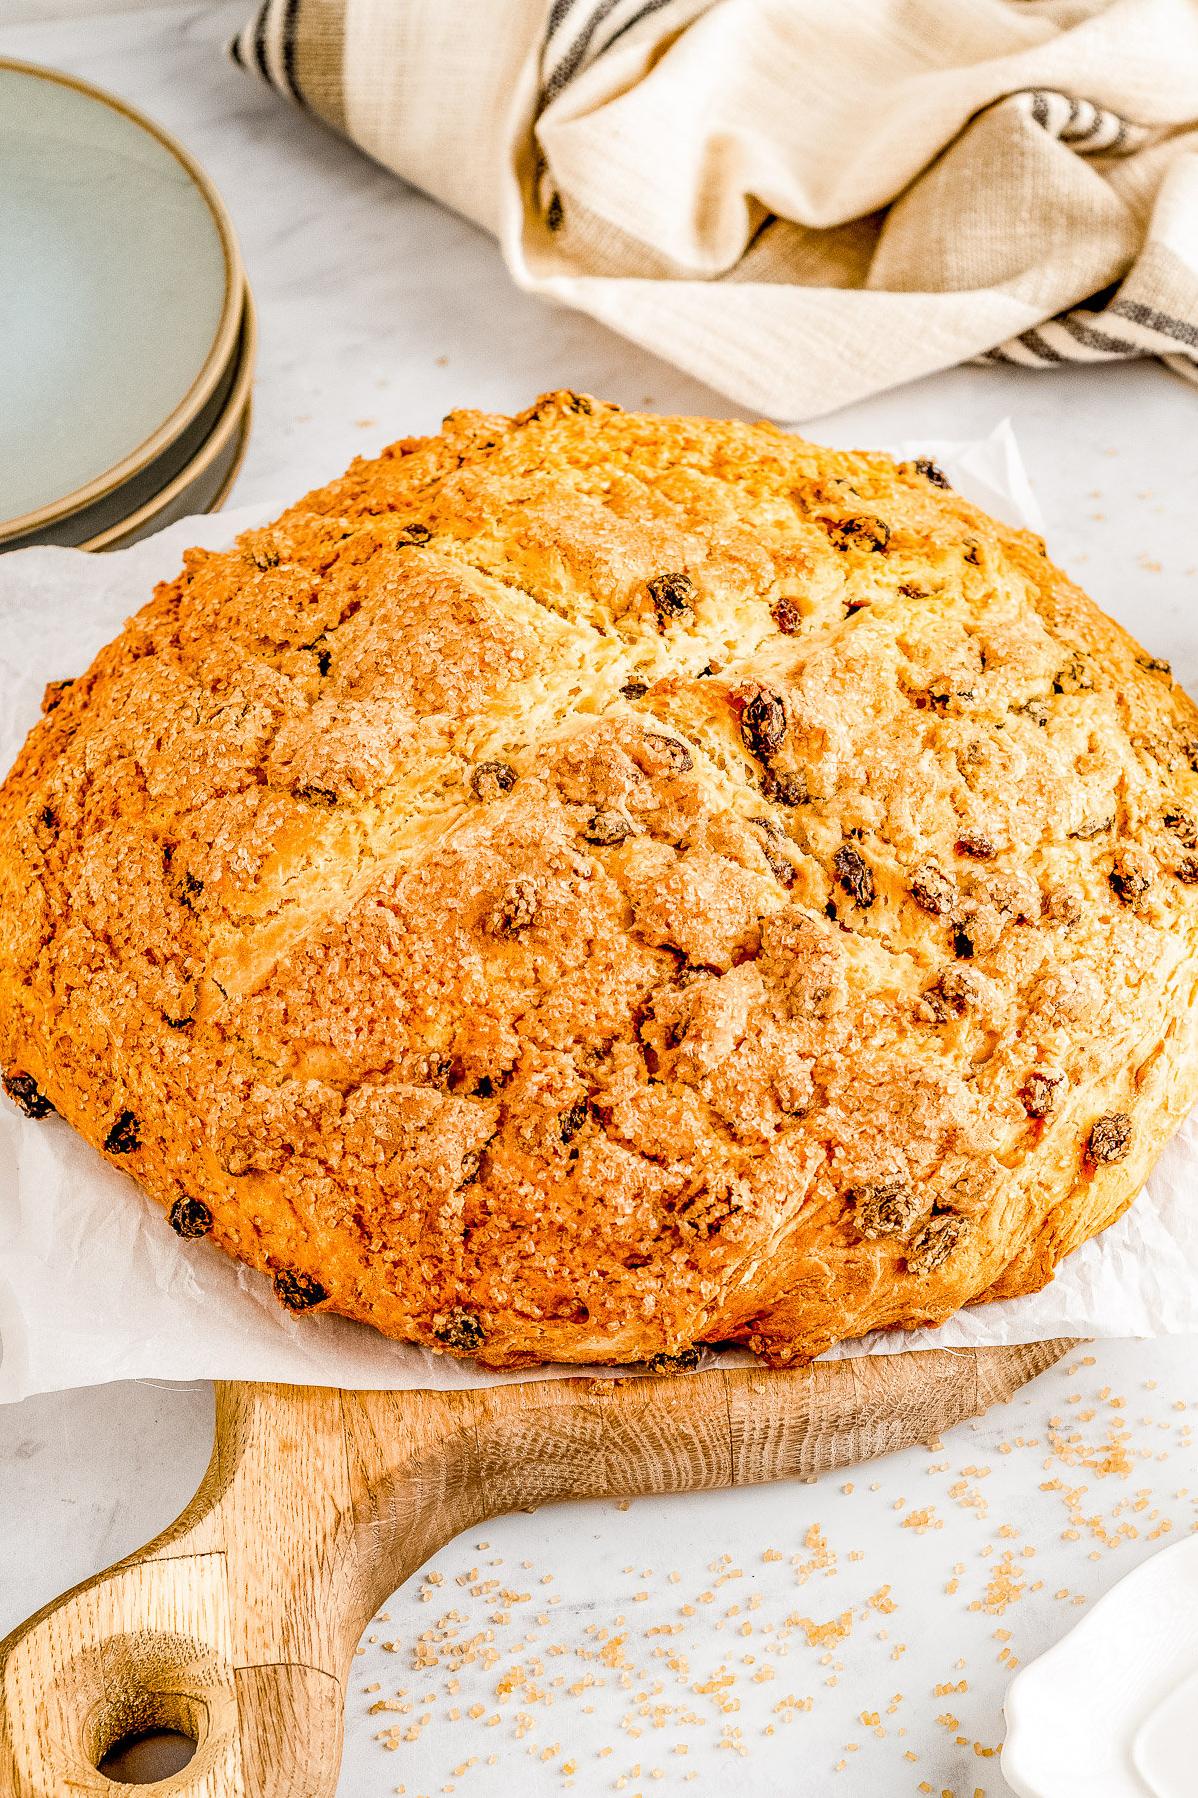  The crust of this soda bread is delightfully crisp, while the interior is moist, tender and full of flavor.